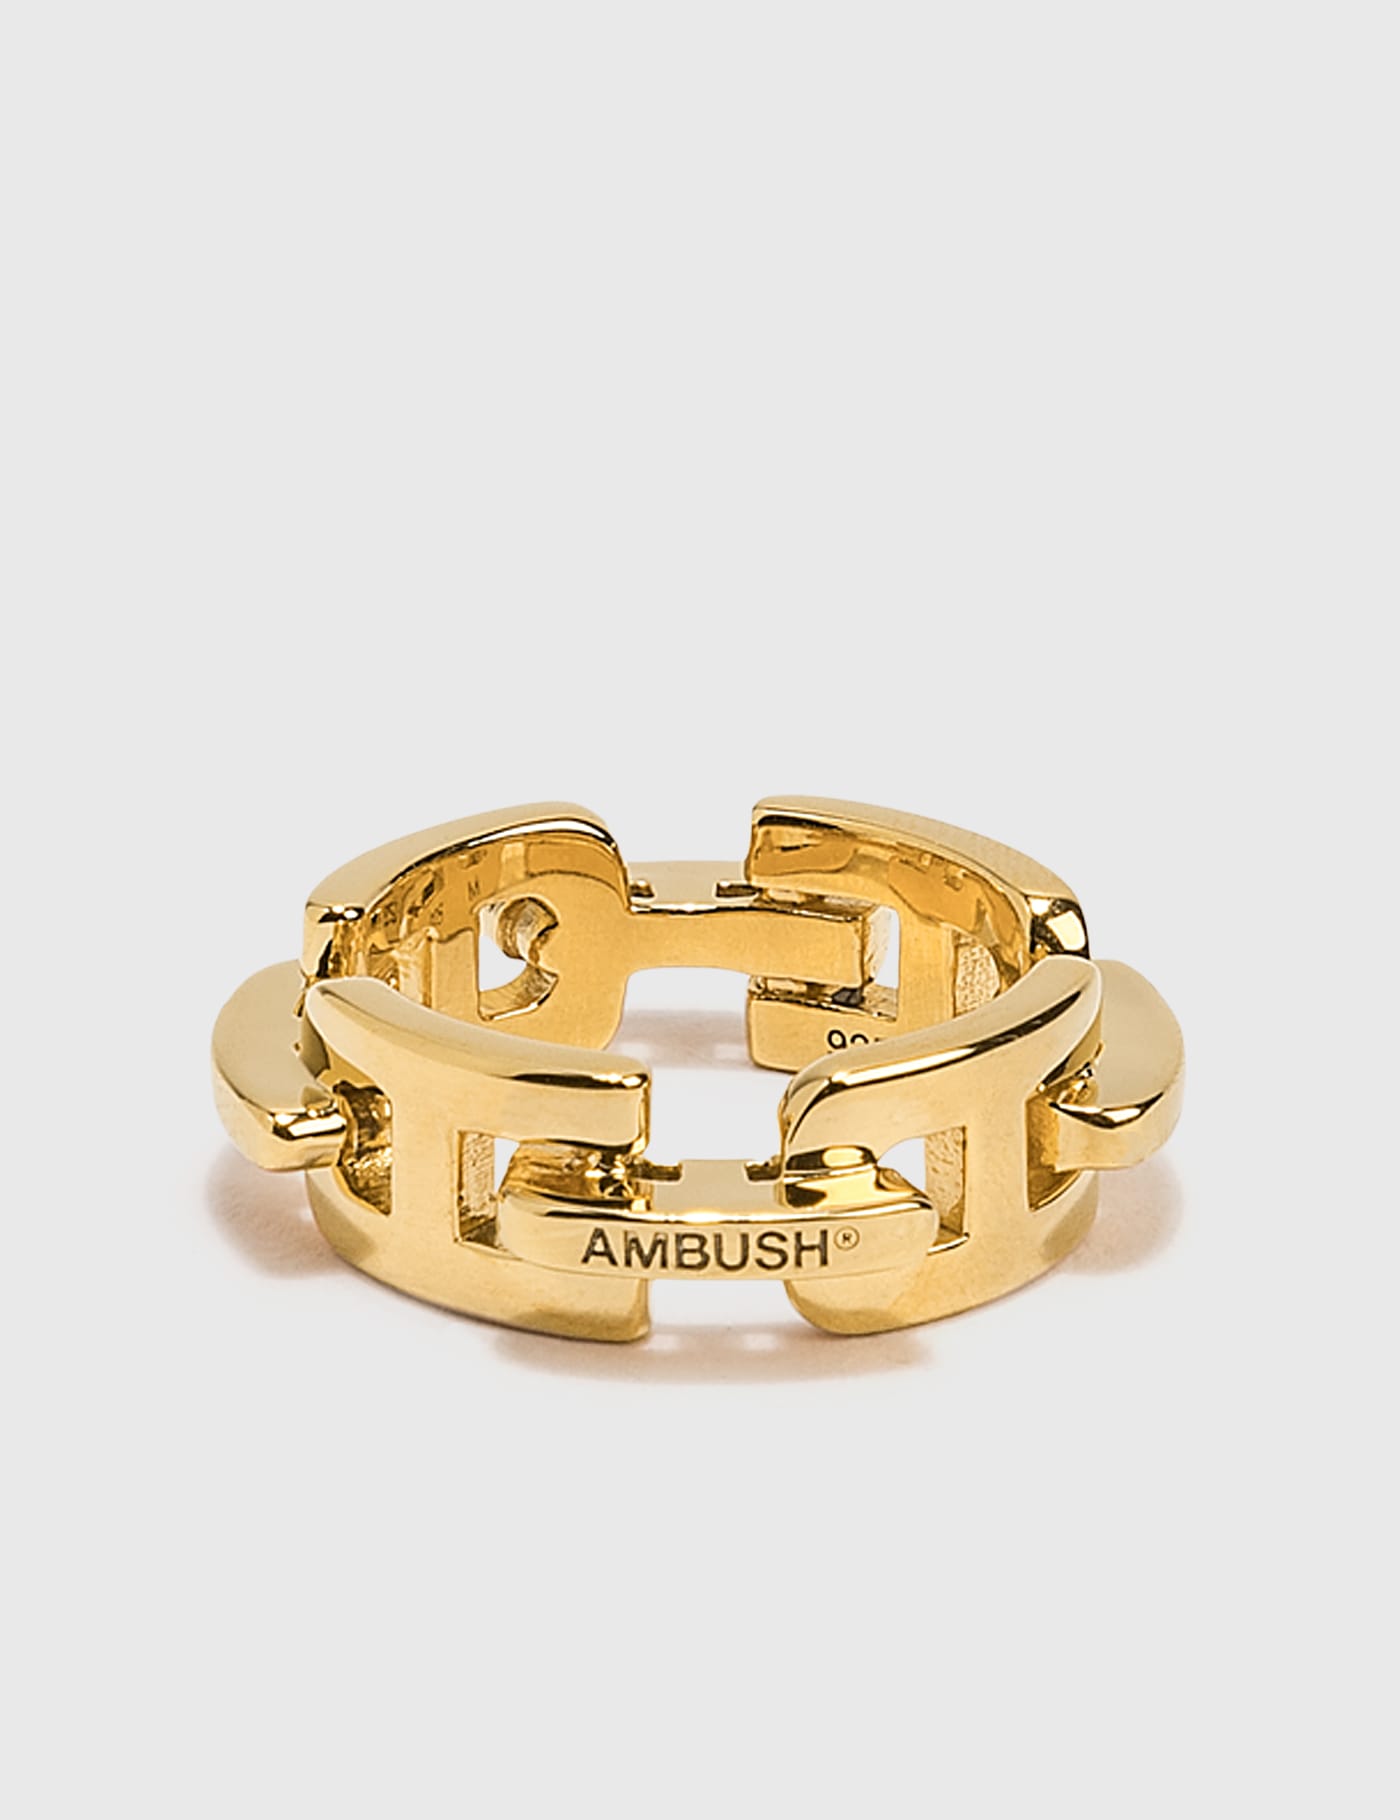 AMBUSH S925 Silver Ring Small Industrial Gift For Men And Women On  Valentines Day From Hxas, $16.1 | DHgate.Com